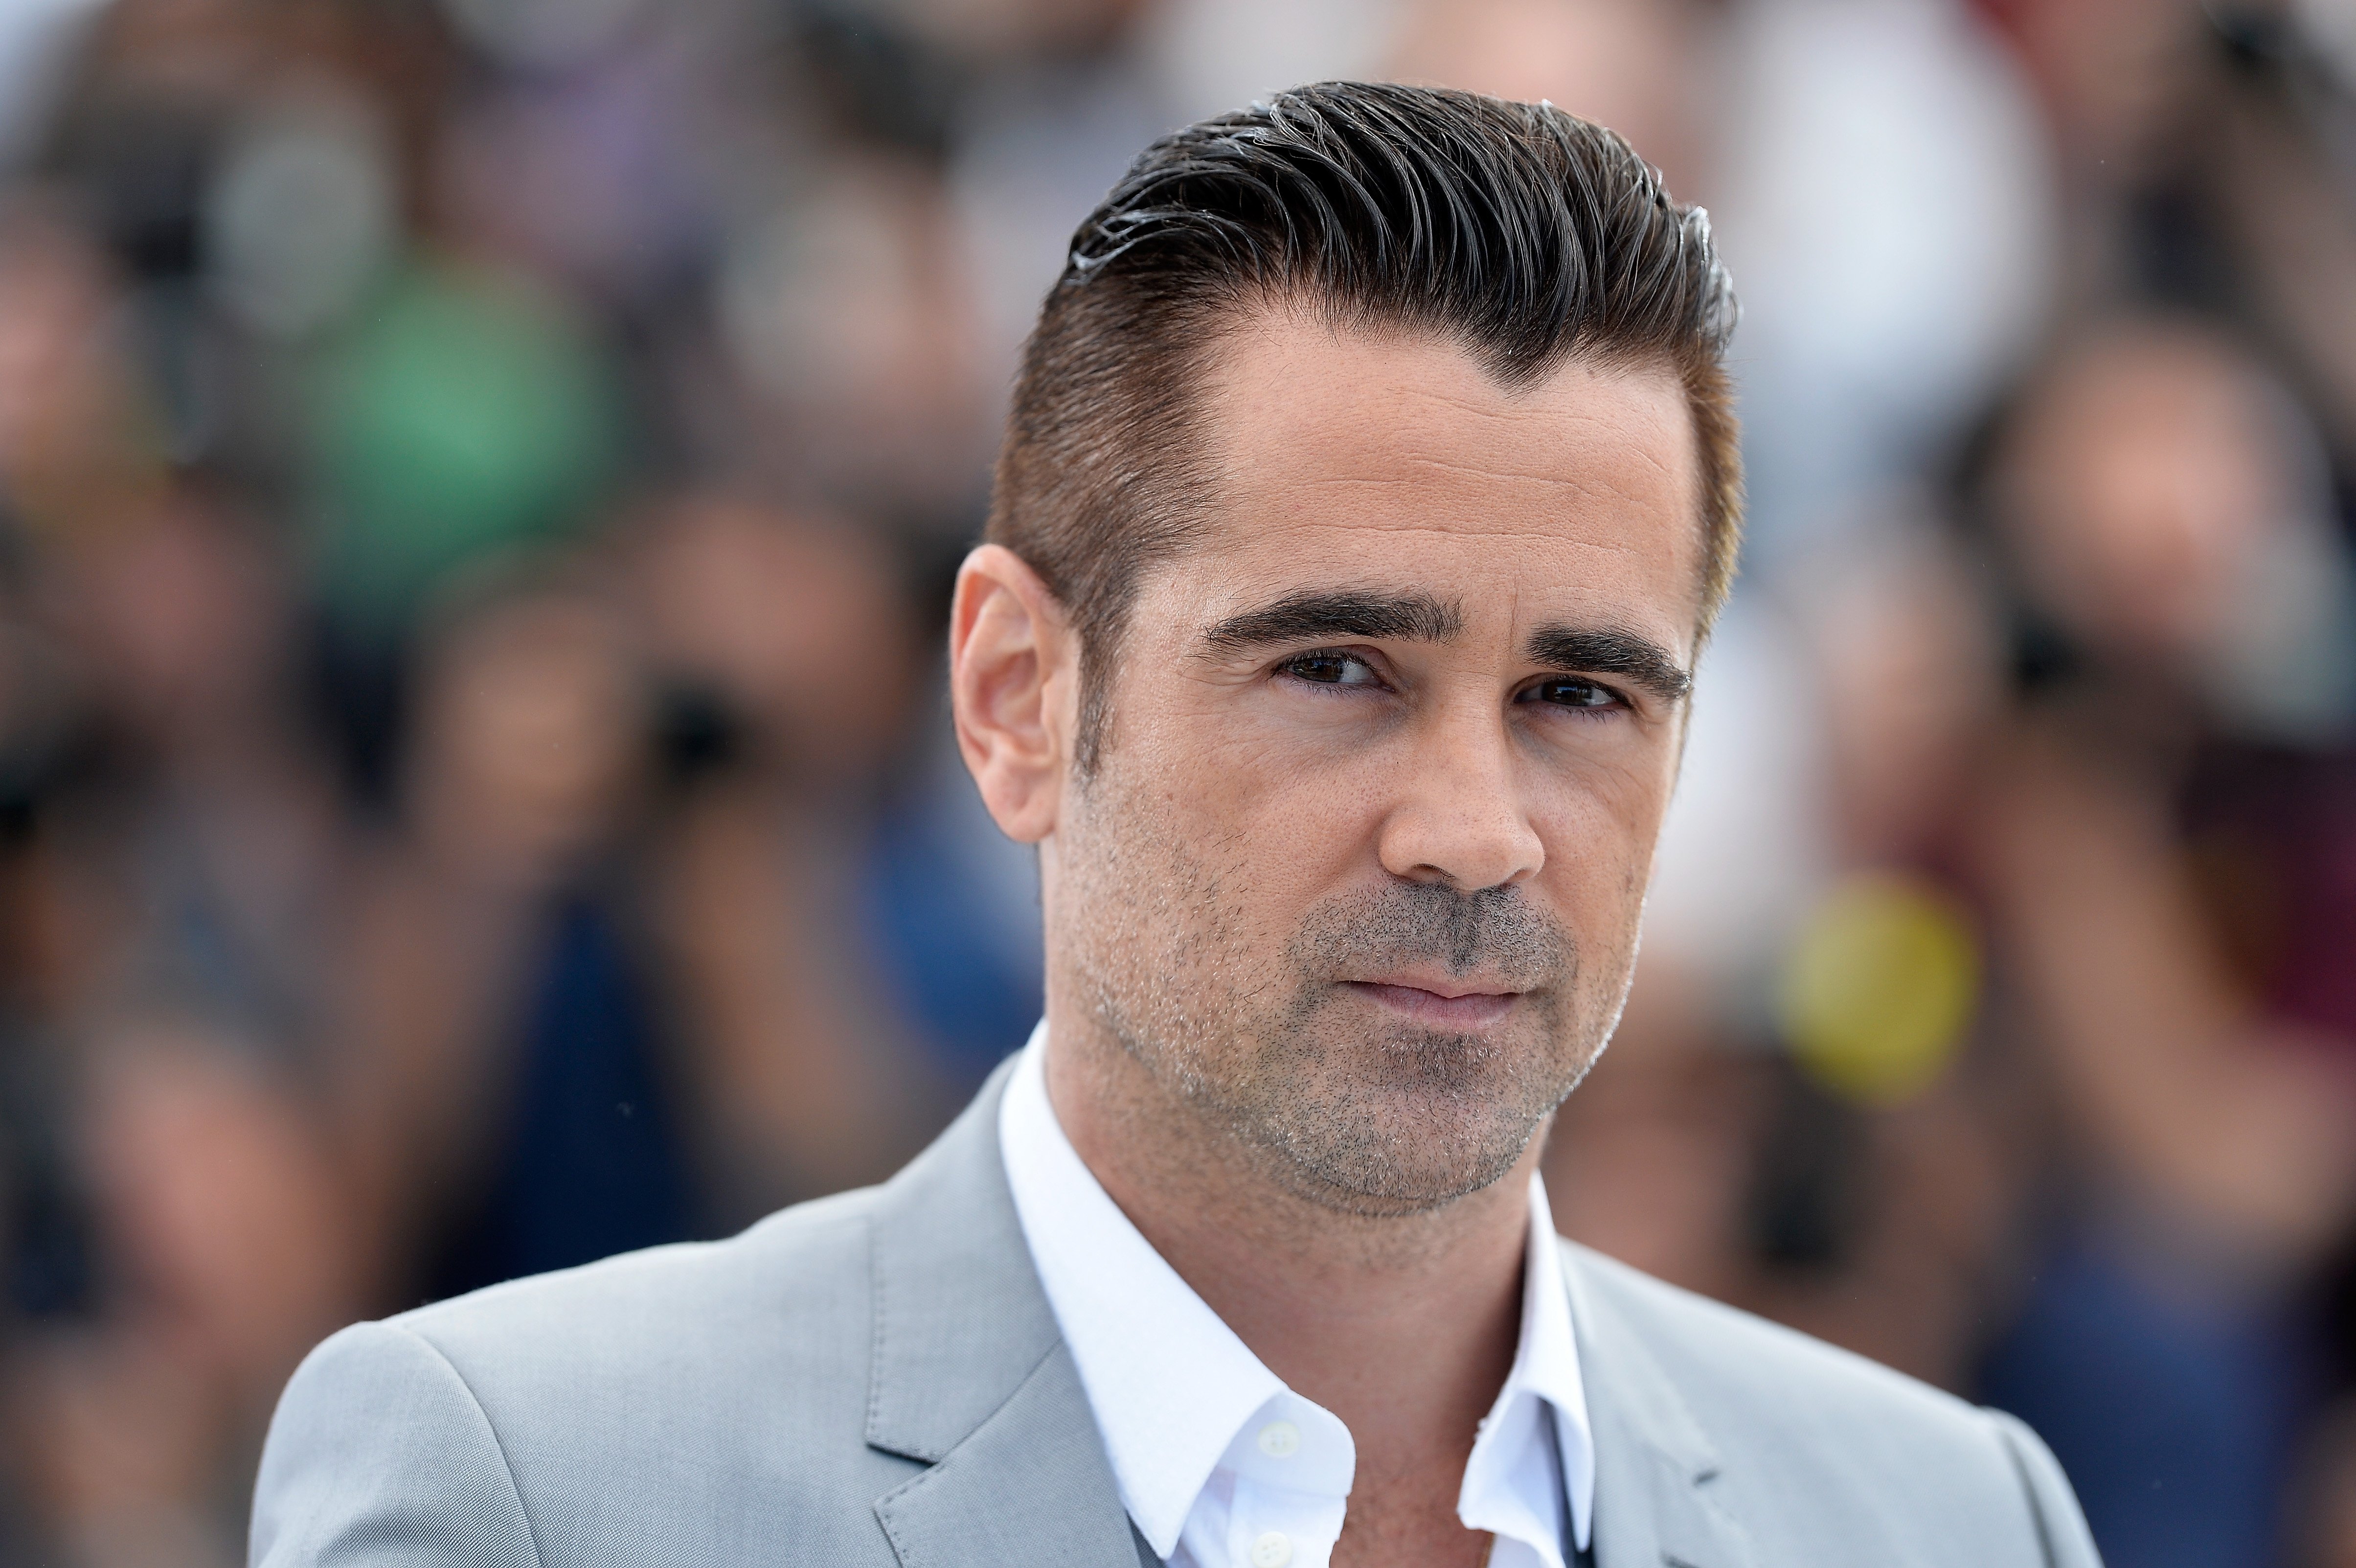 Colin Farrell attends a photocall for "The Lobster" during the 68th annual Cannes Film Festival on May 15, 2015, in Cannes, France. | Source: Getty Images